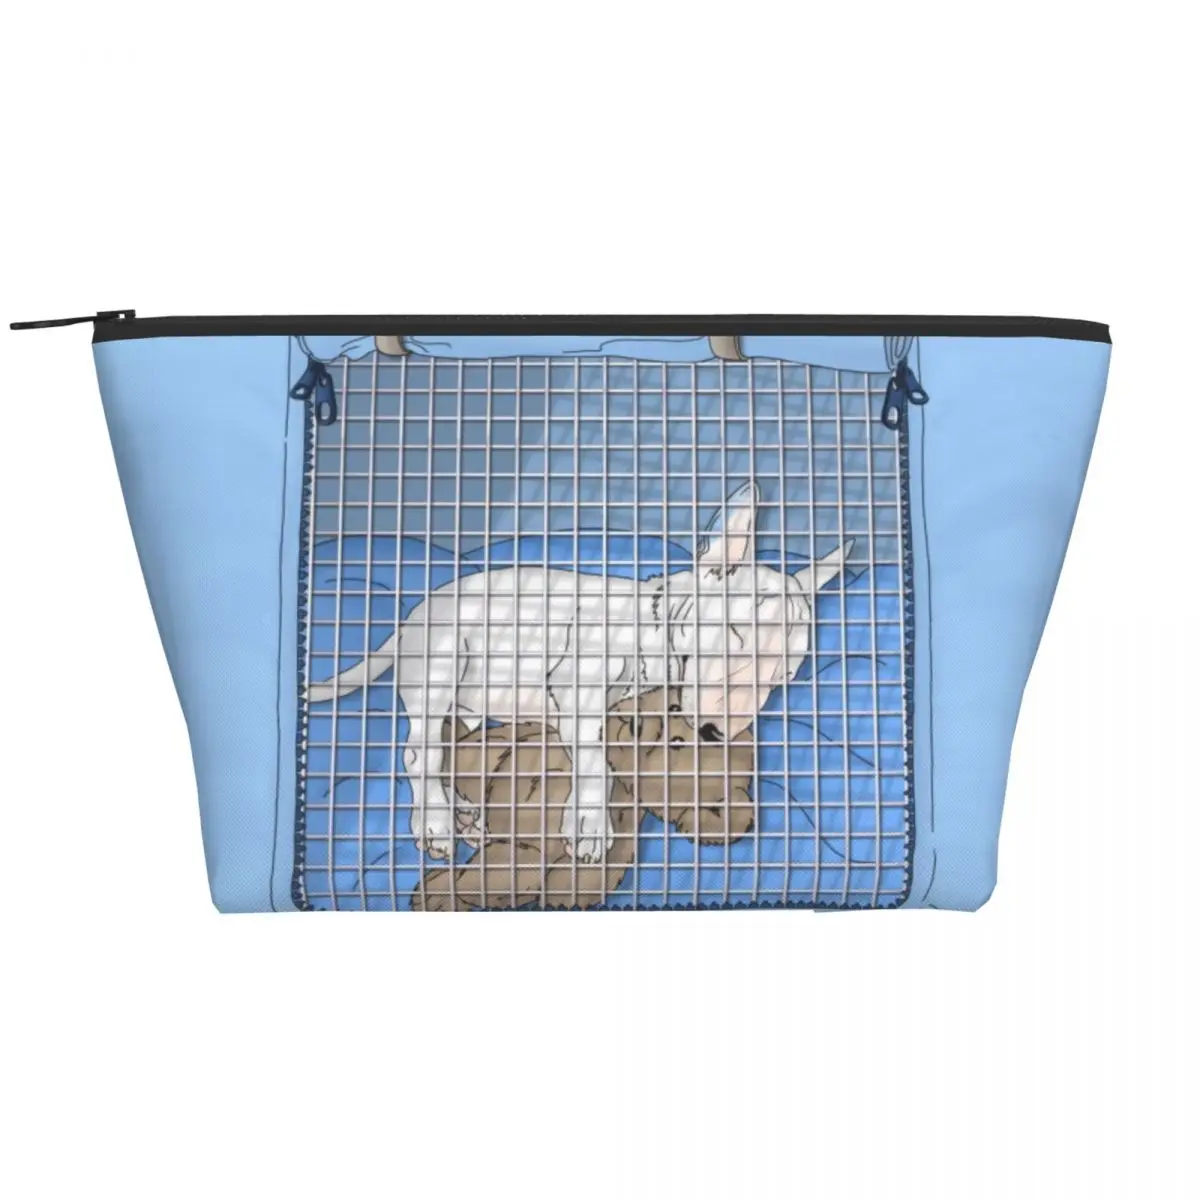 

Cute Bull Terrier Cosmetic Bag Women Cute Large Capacity Puppy Dog Makeup Case Beauty Storage Toiletry Bags